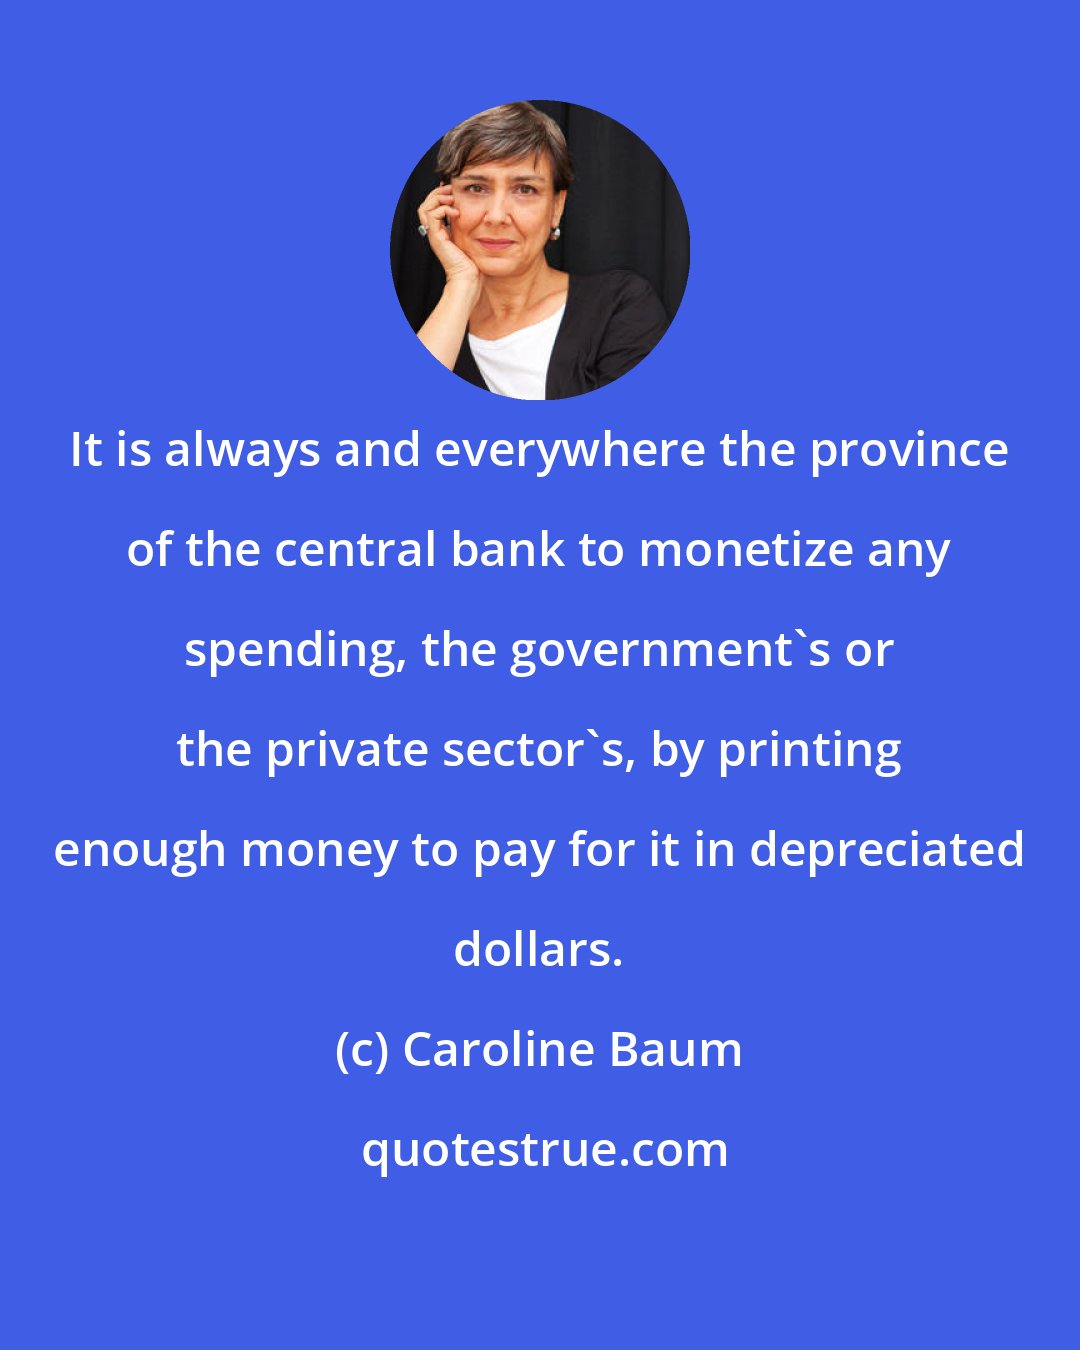 Caroline Baum: It is always and everywhere the province of the central bank to monetize any spending, the government's or the private sector's, by printing enough money to pay for it in depreciated dollars.